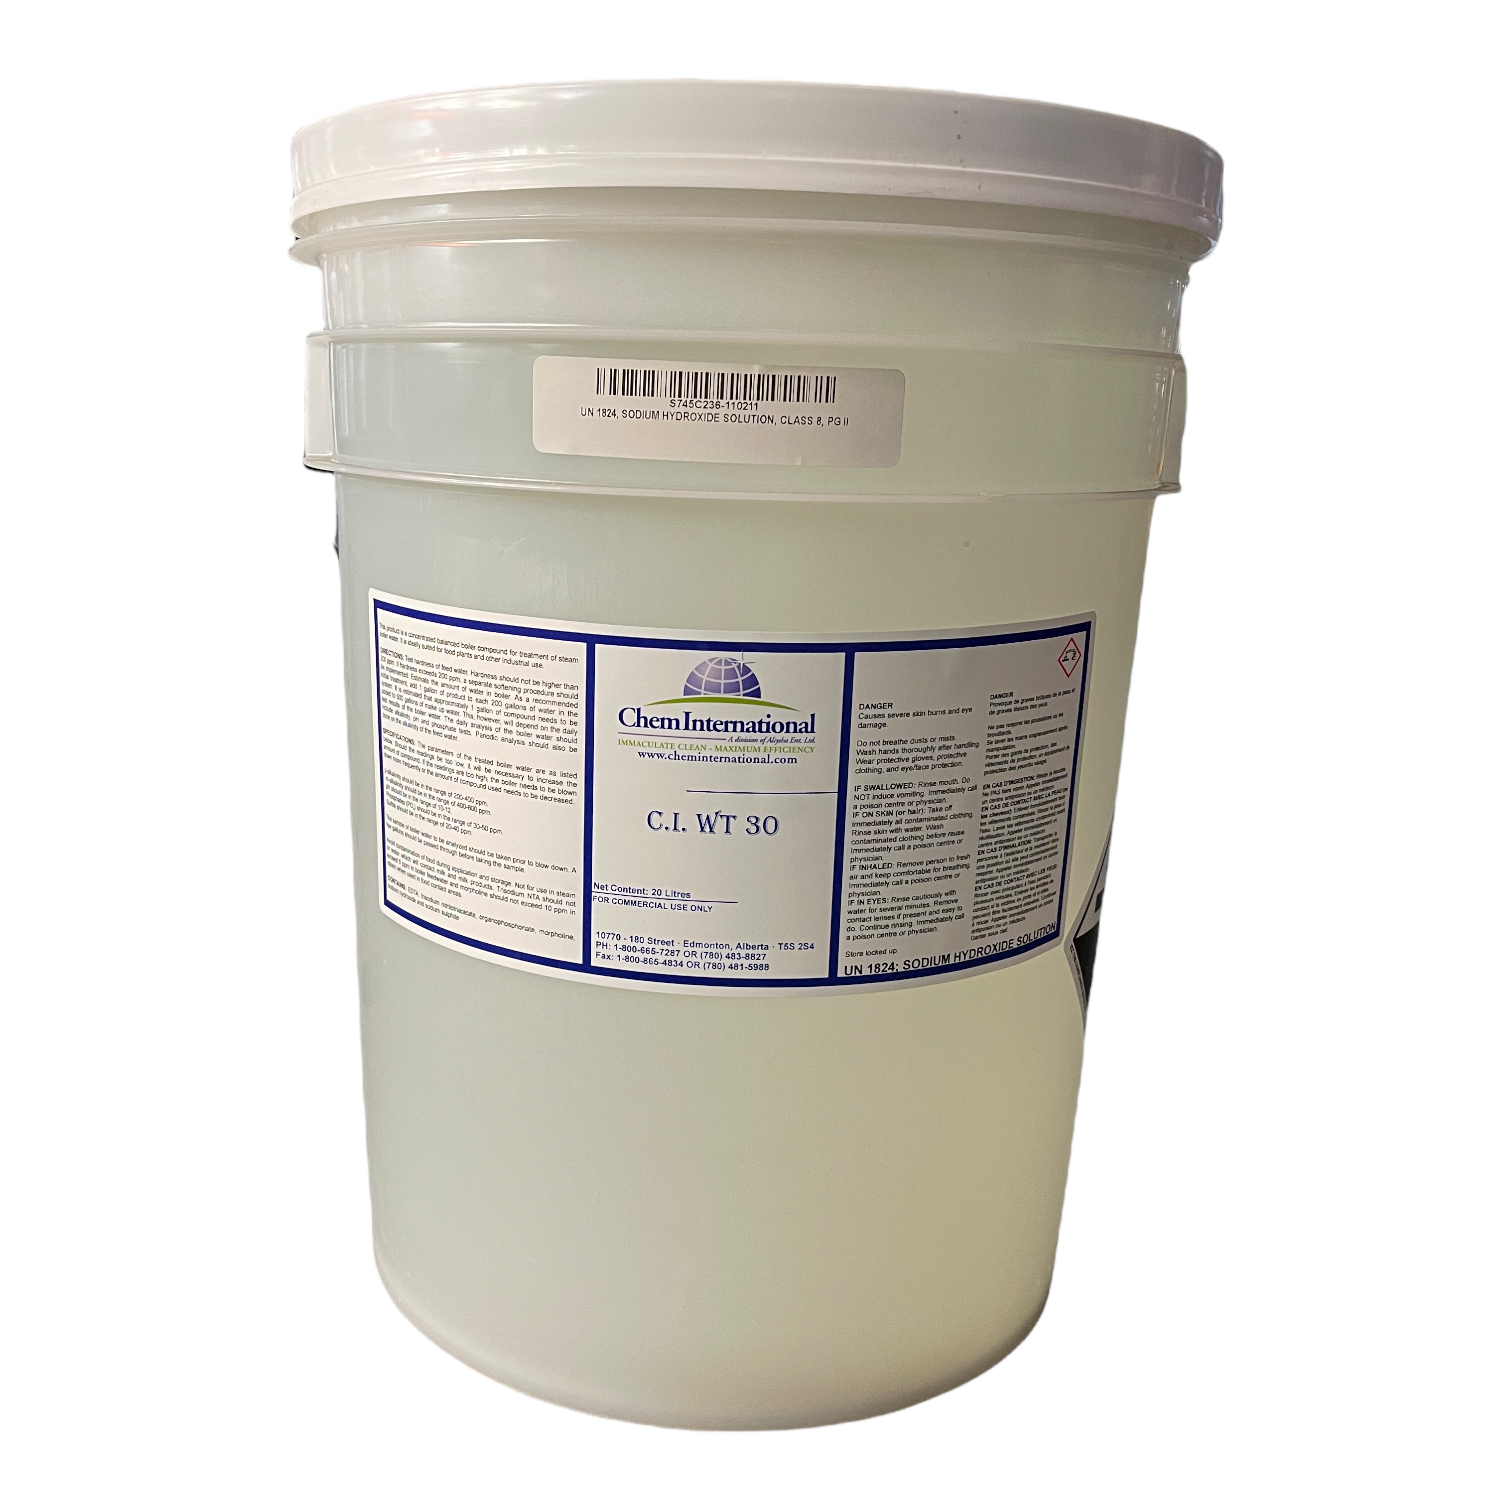 No. 30 Boiler Compound The Custodian Commercial Sanitation & Industrial Maintenance Products